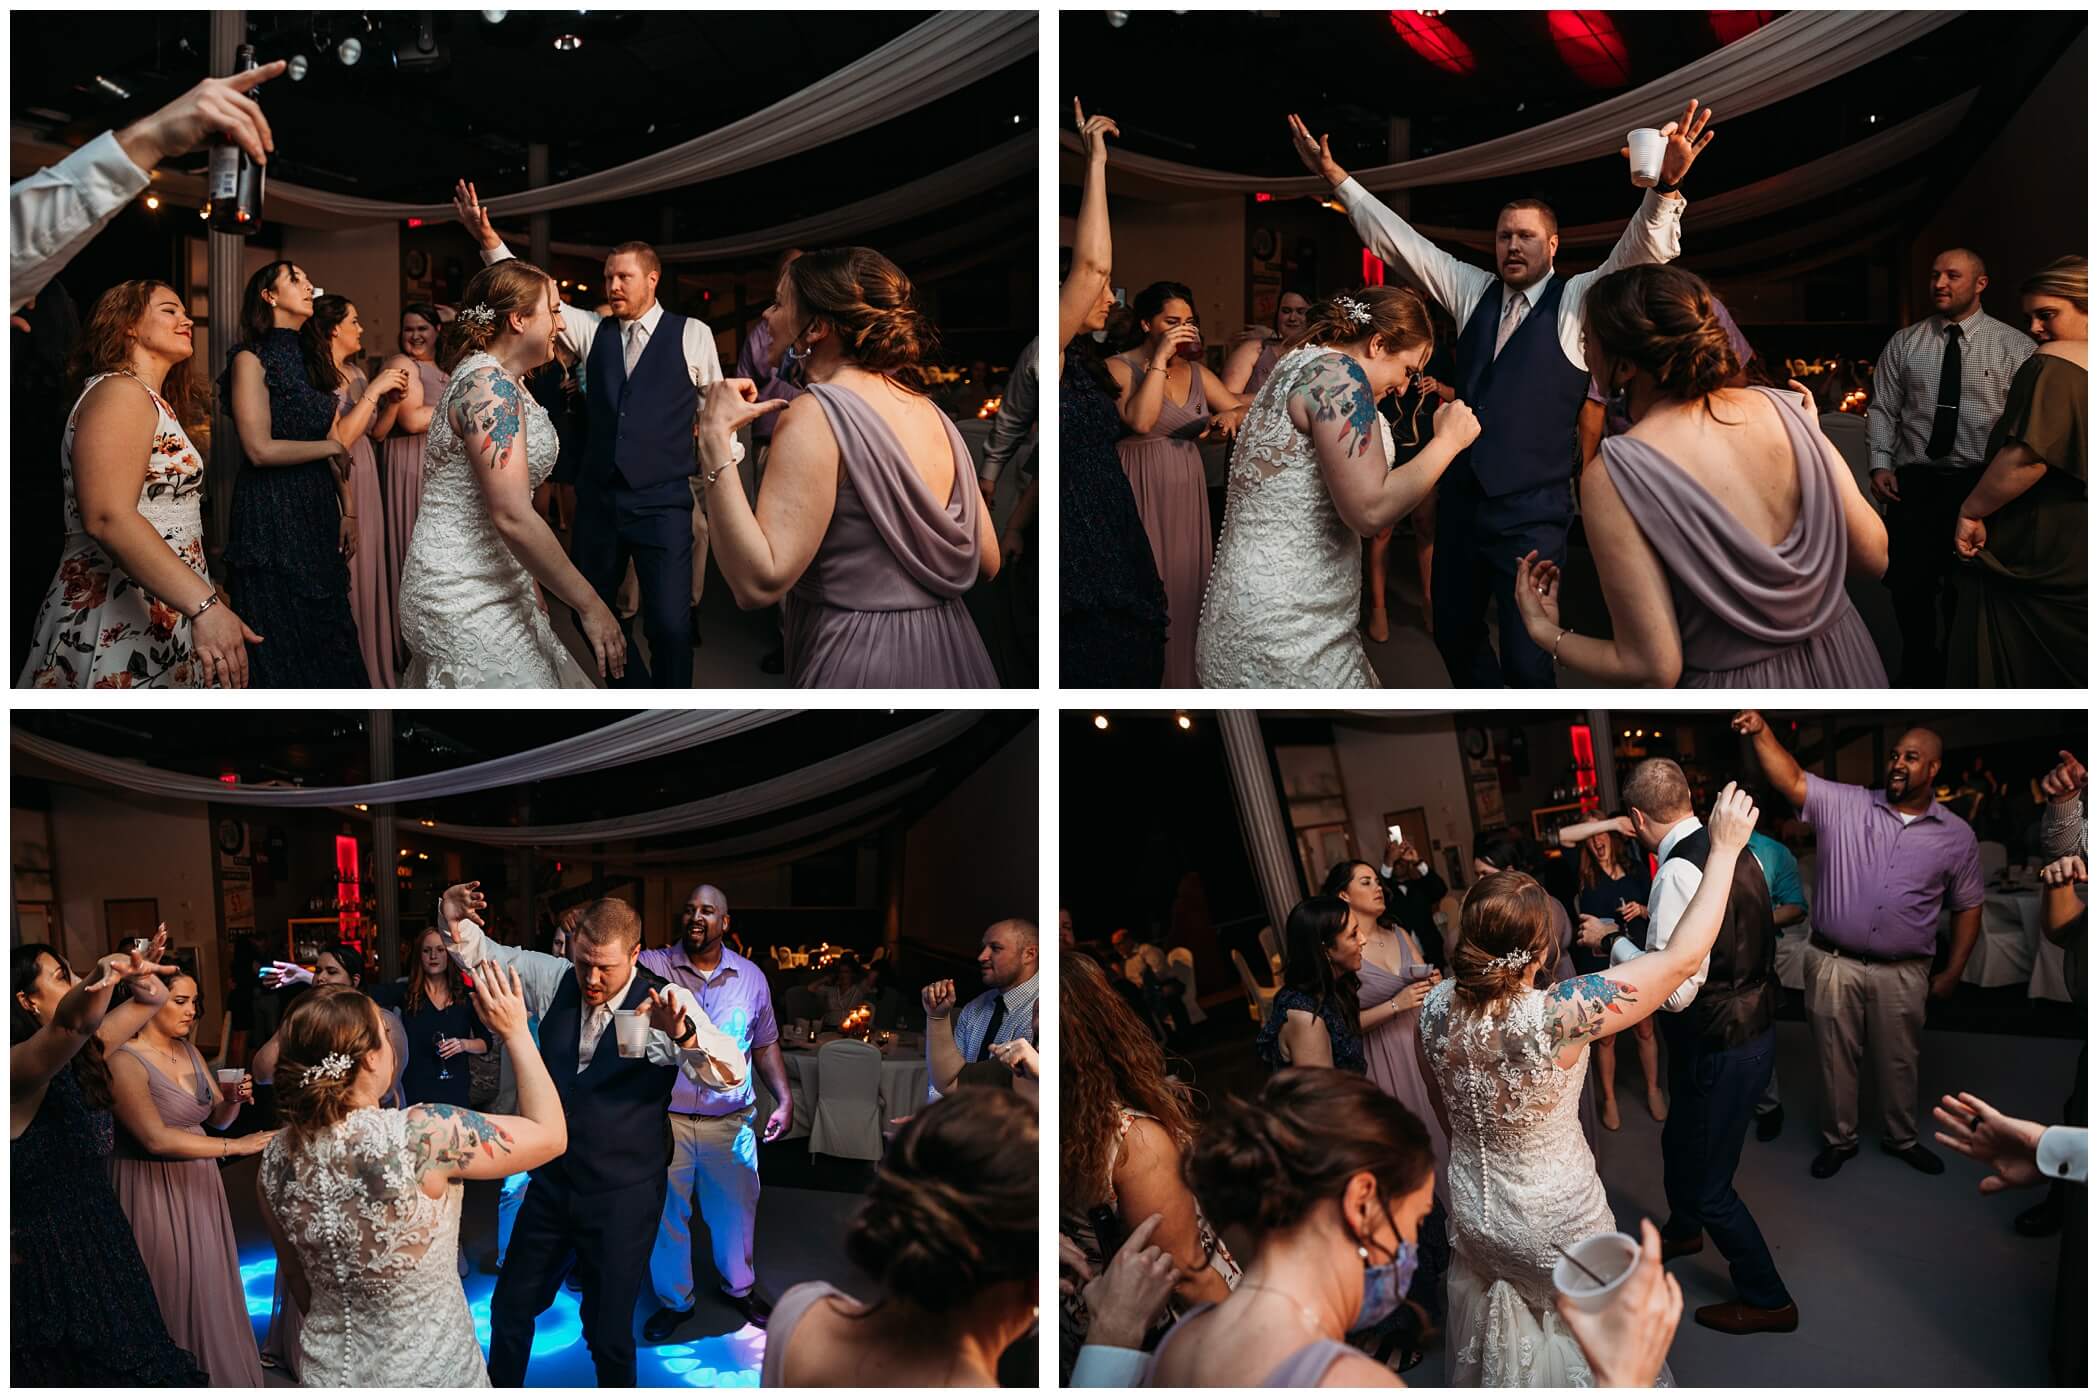 A full dance floor during a wedding reception at Common Chord in downtown Davenport, Iowa.